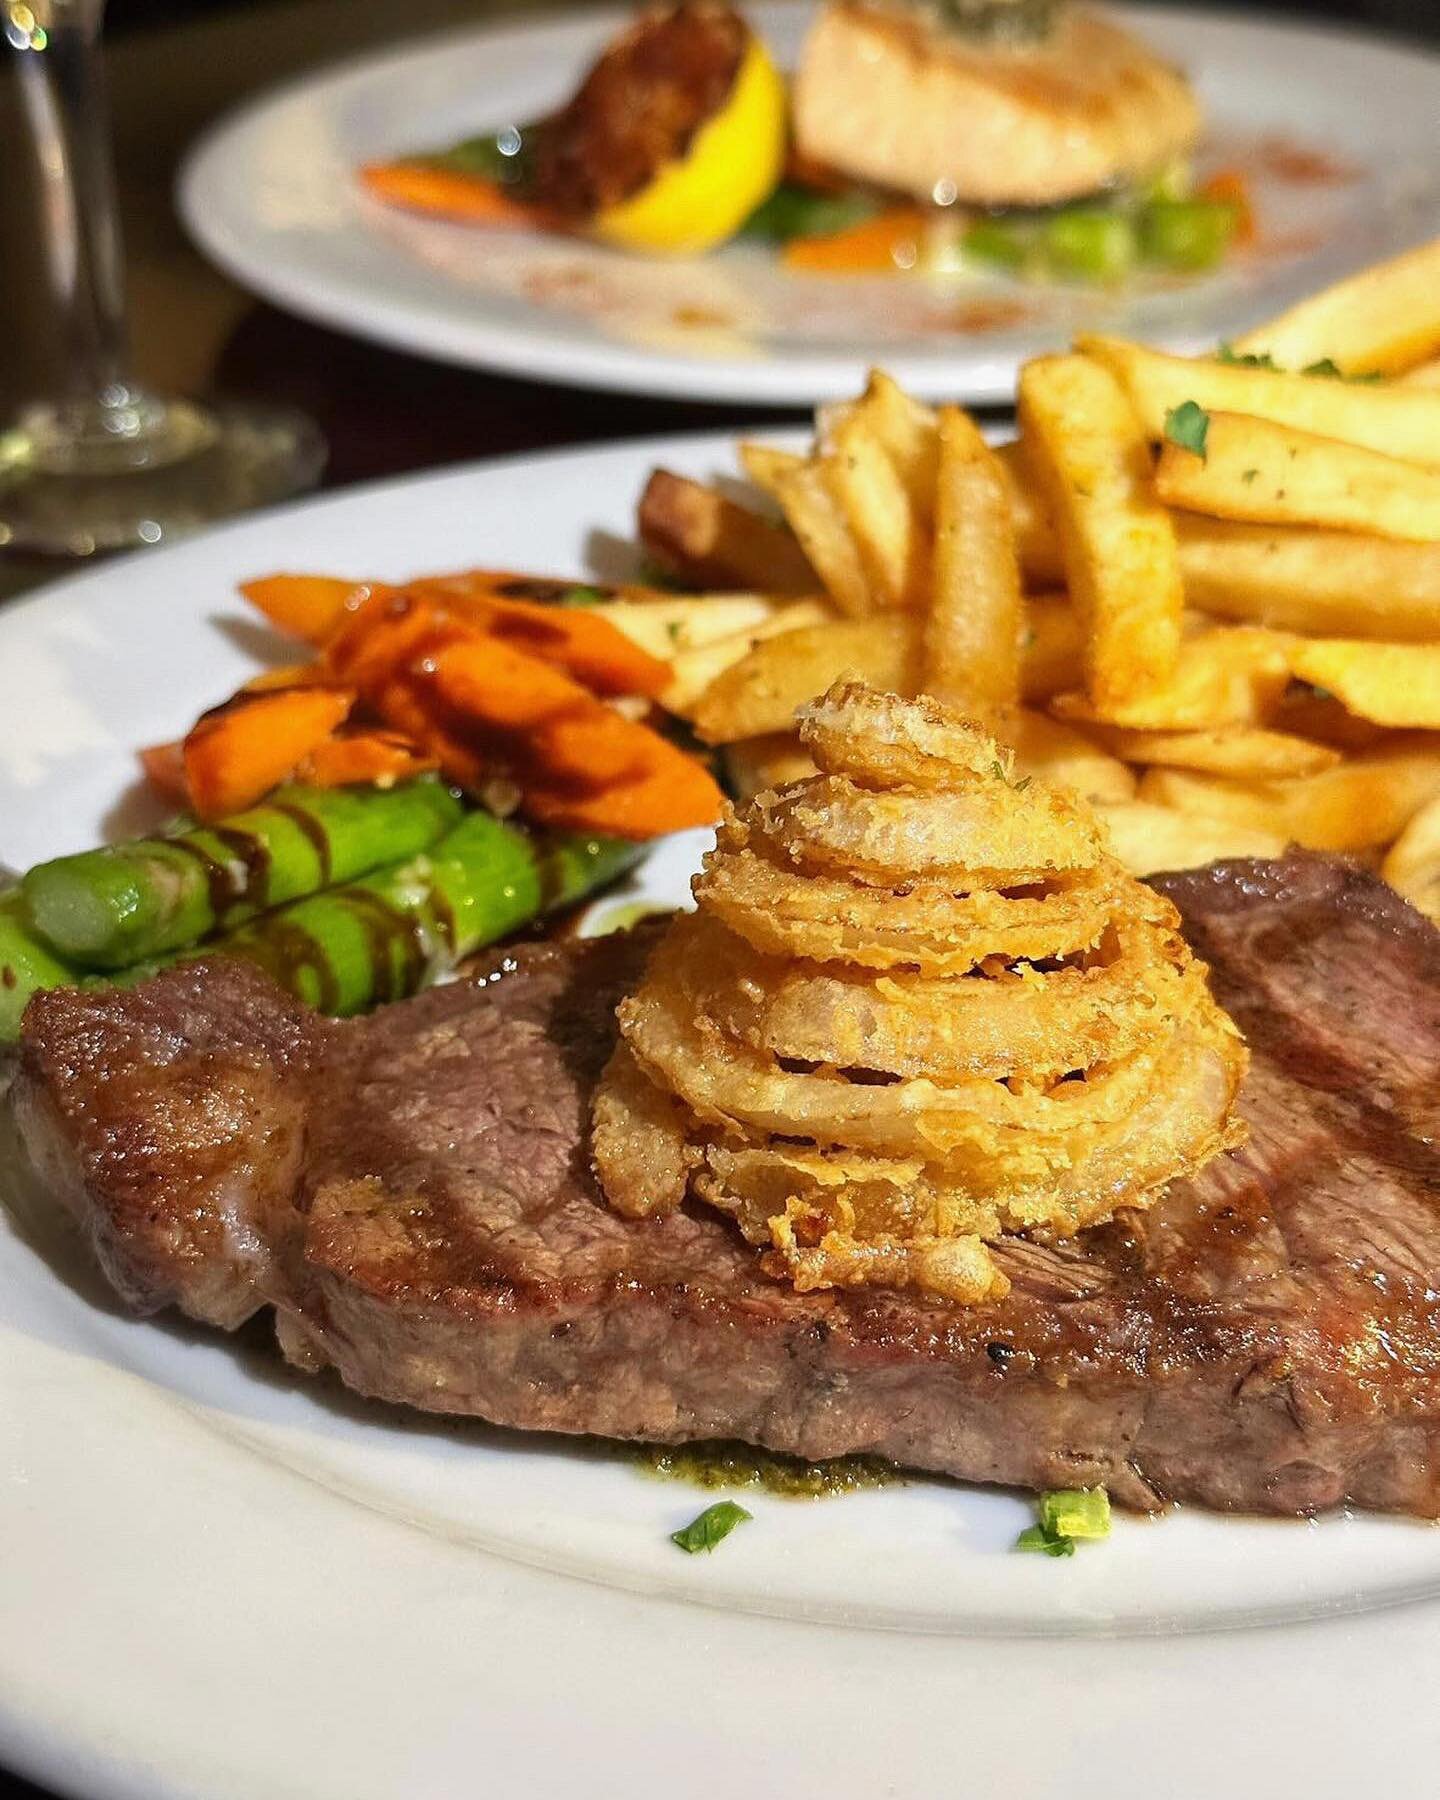 Feeling the Monday Blues?? Come on down to Engine Co No 28 for our delicious USDA Prime NY Steak! Tasty and fulfilling&hellip; just what you need to kick off the work week 🥳🤩 #enginecono28 #engineco28 #dtla #dtlarestaurant #dtlafoodie #newyorksteak